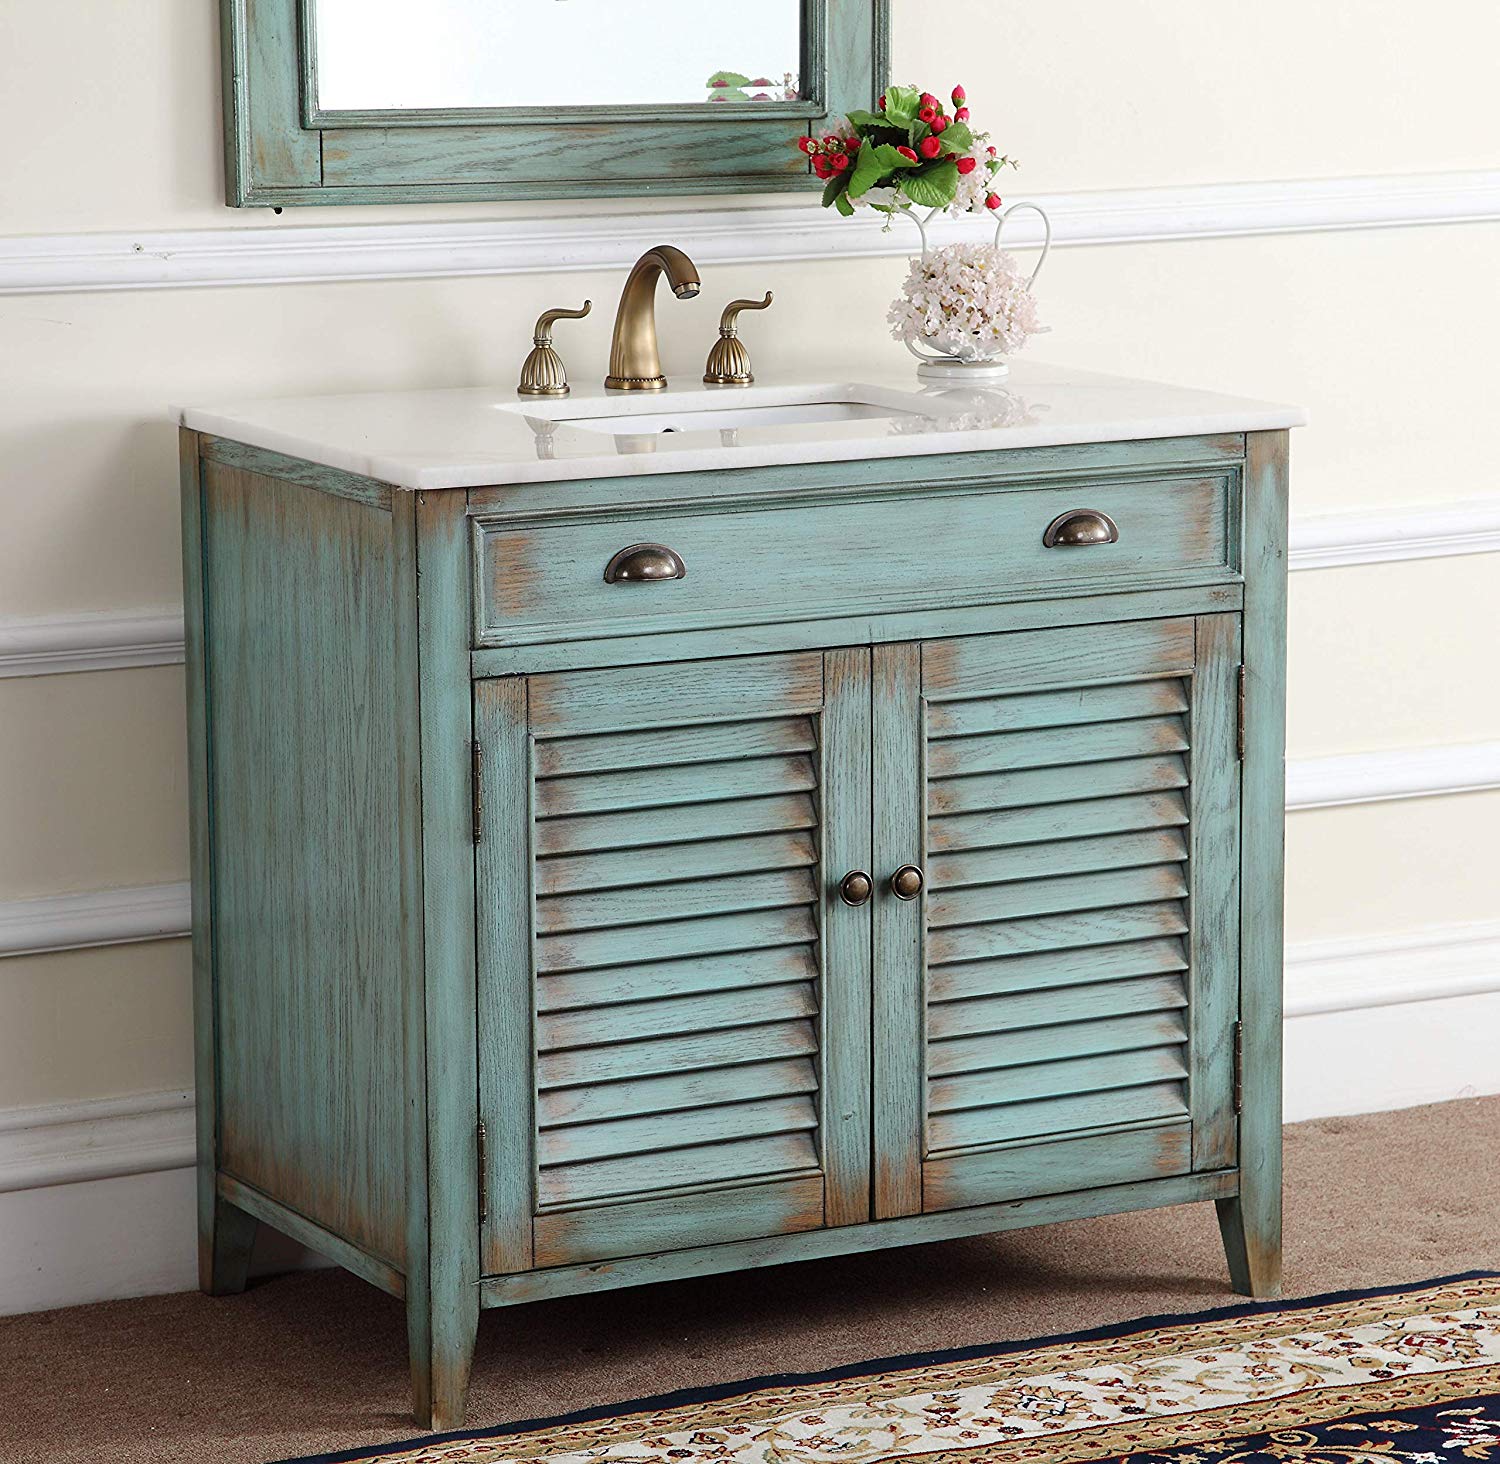  Create a Rustic and Distressed Vanity